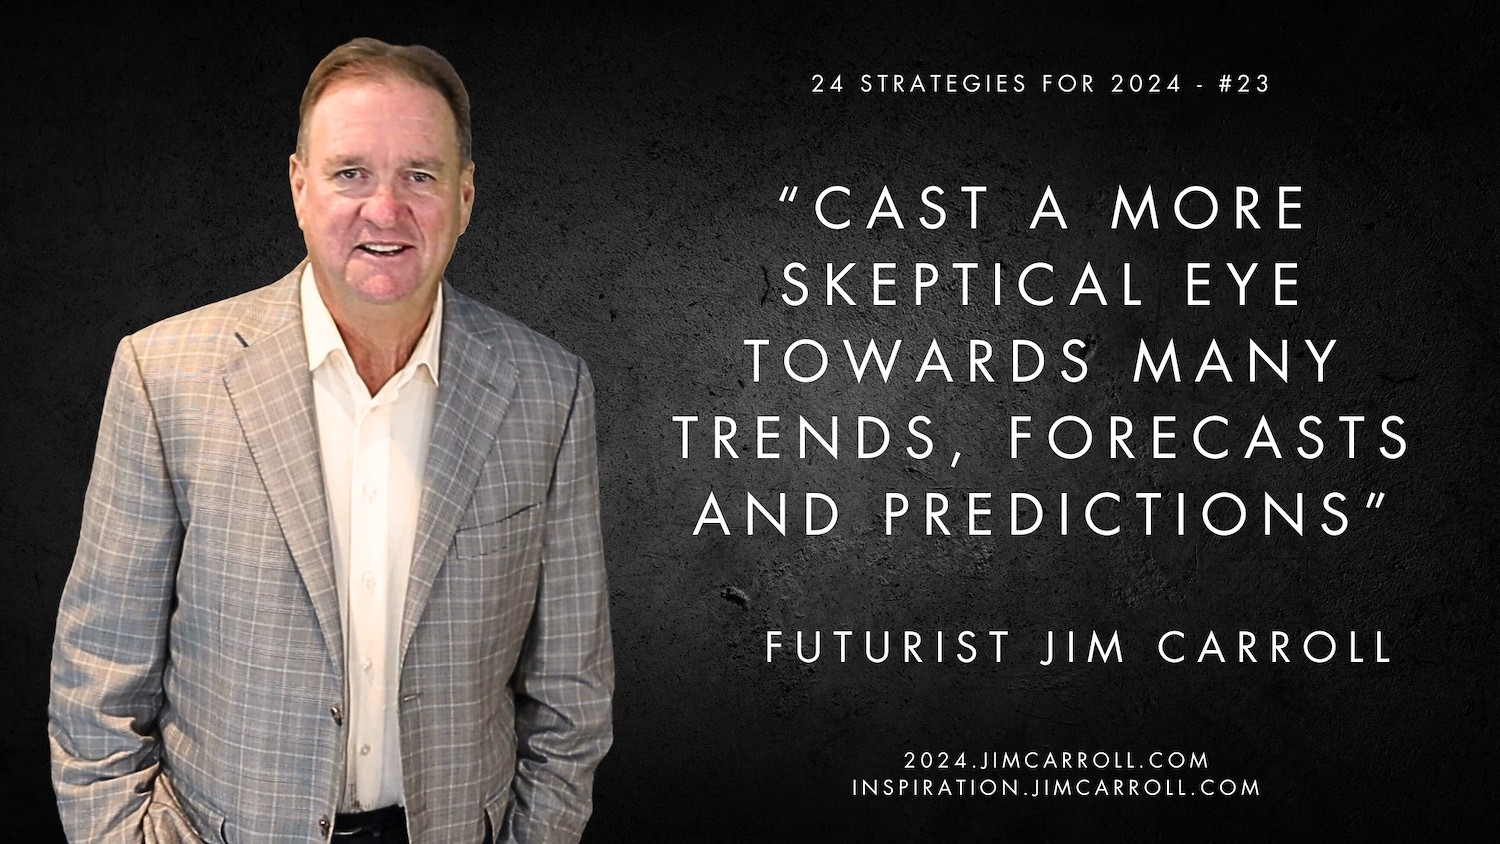 "Cast a more skeptical eye towards many trends, forecasts and predictions” - Futurist Jim Carroll